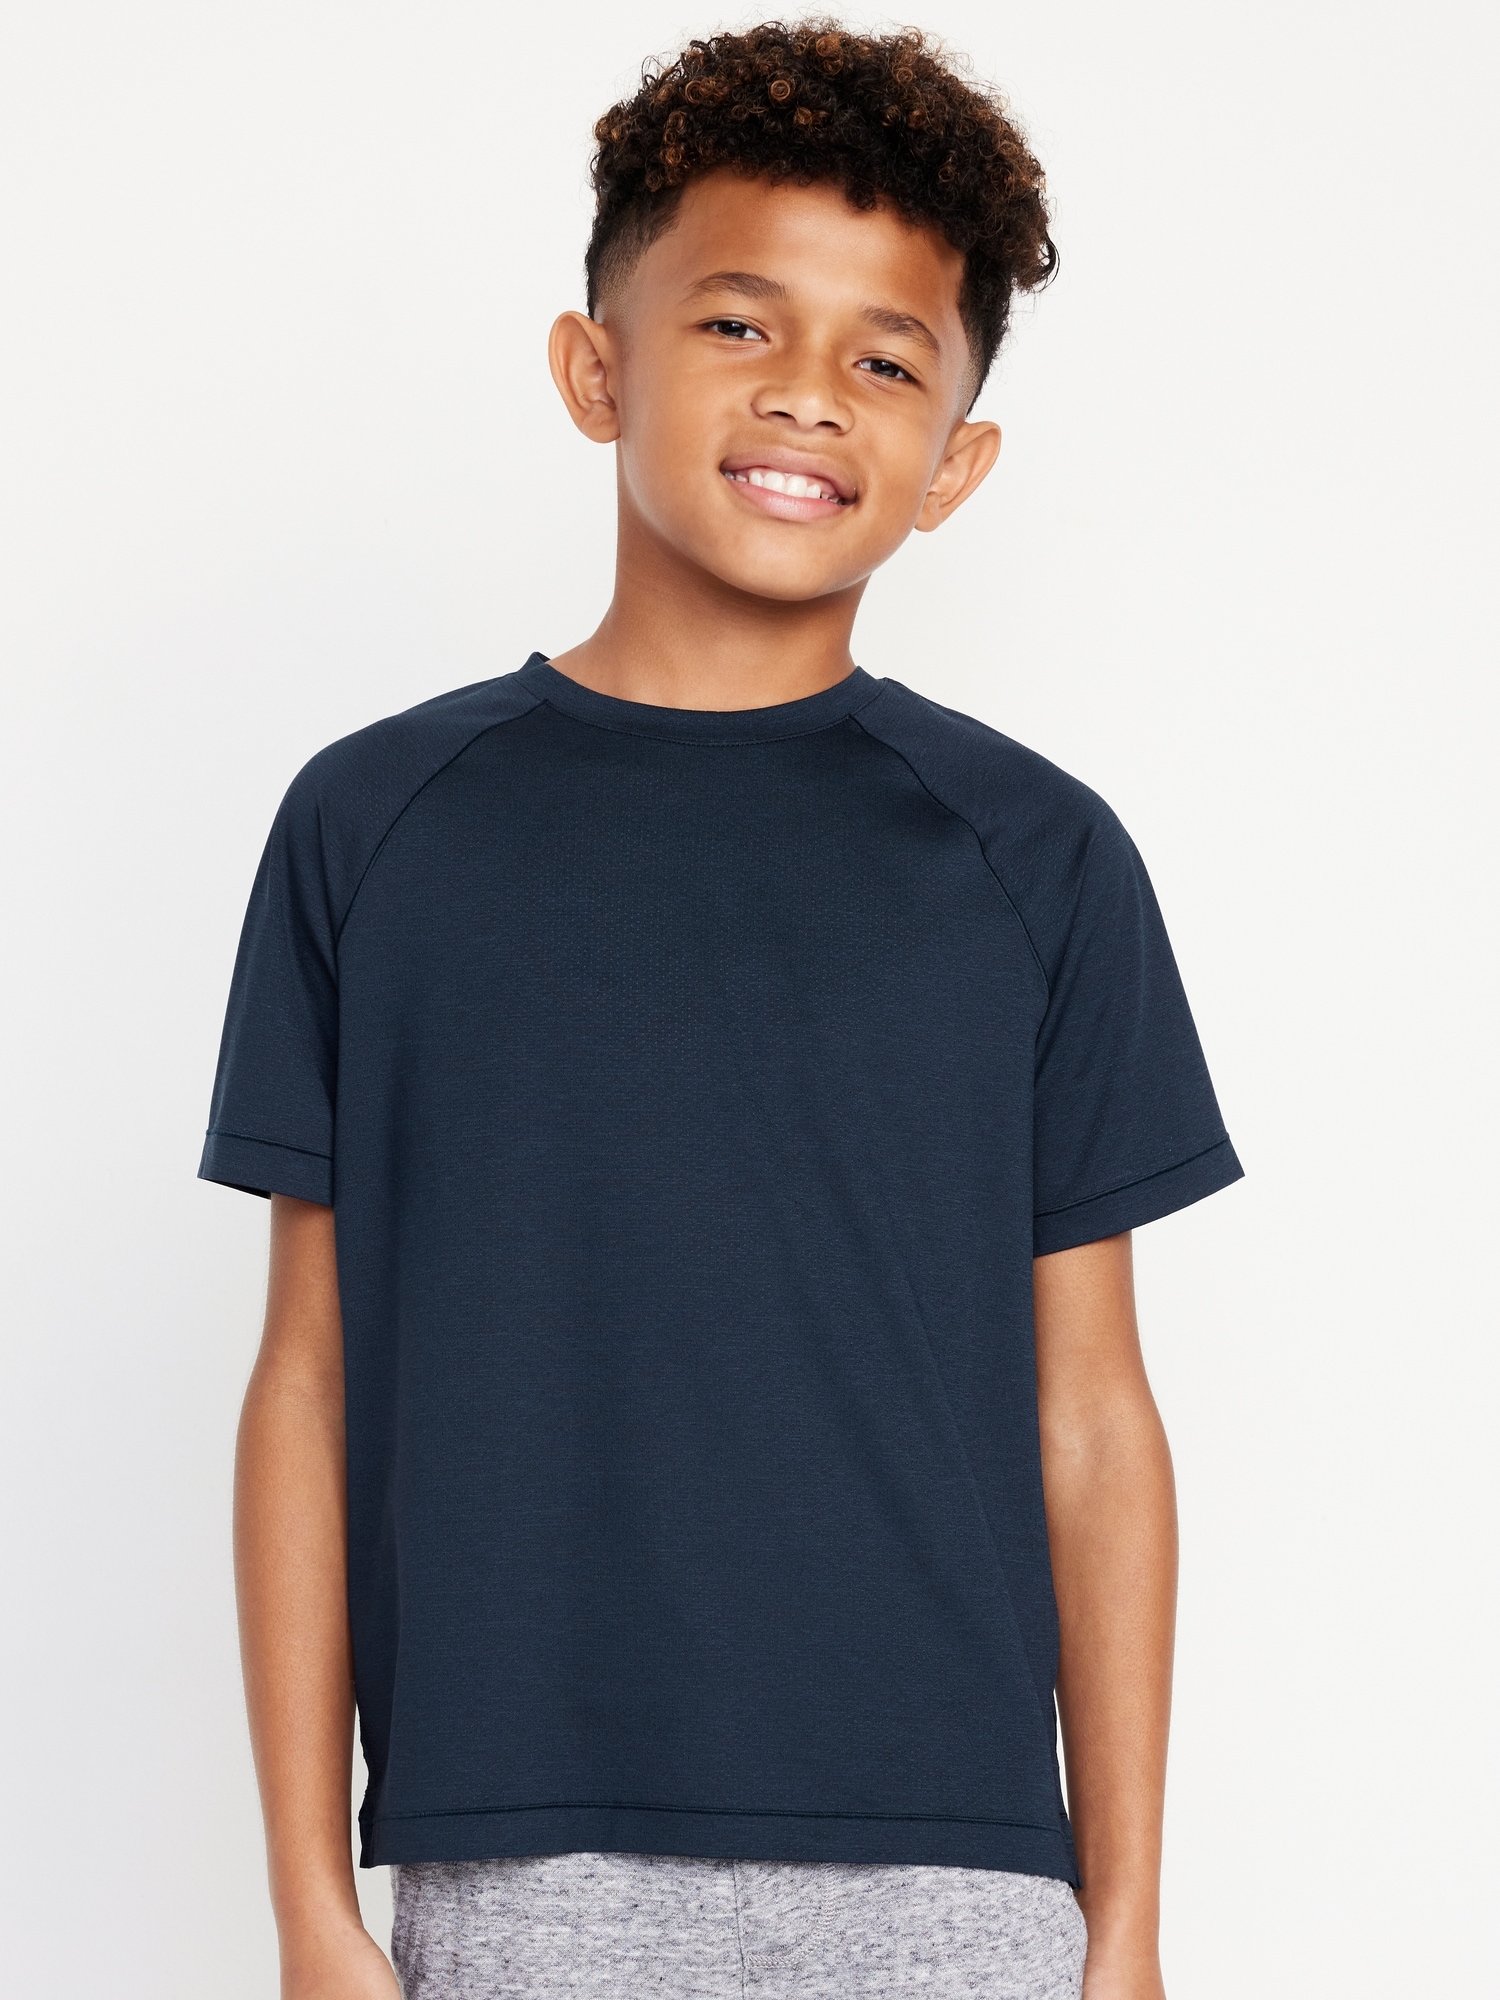 Go-Dry Cool Performance T-Shirt for Boys